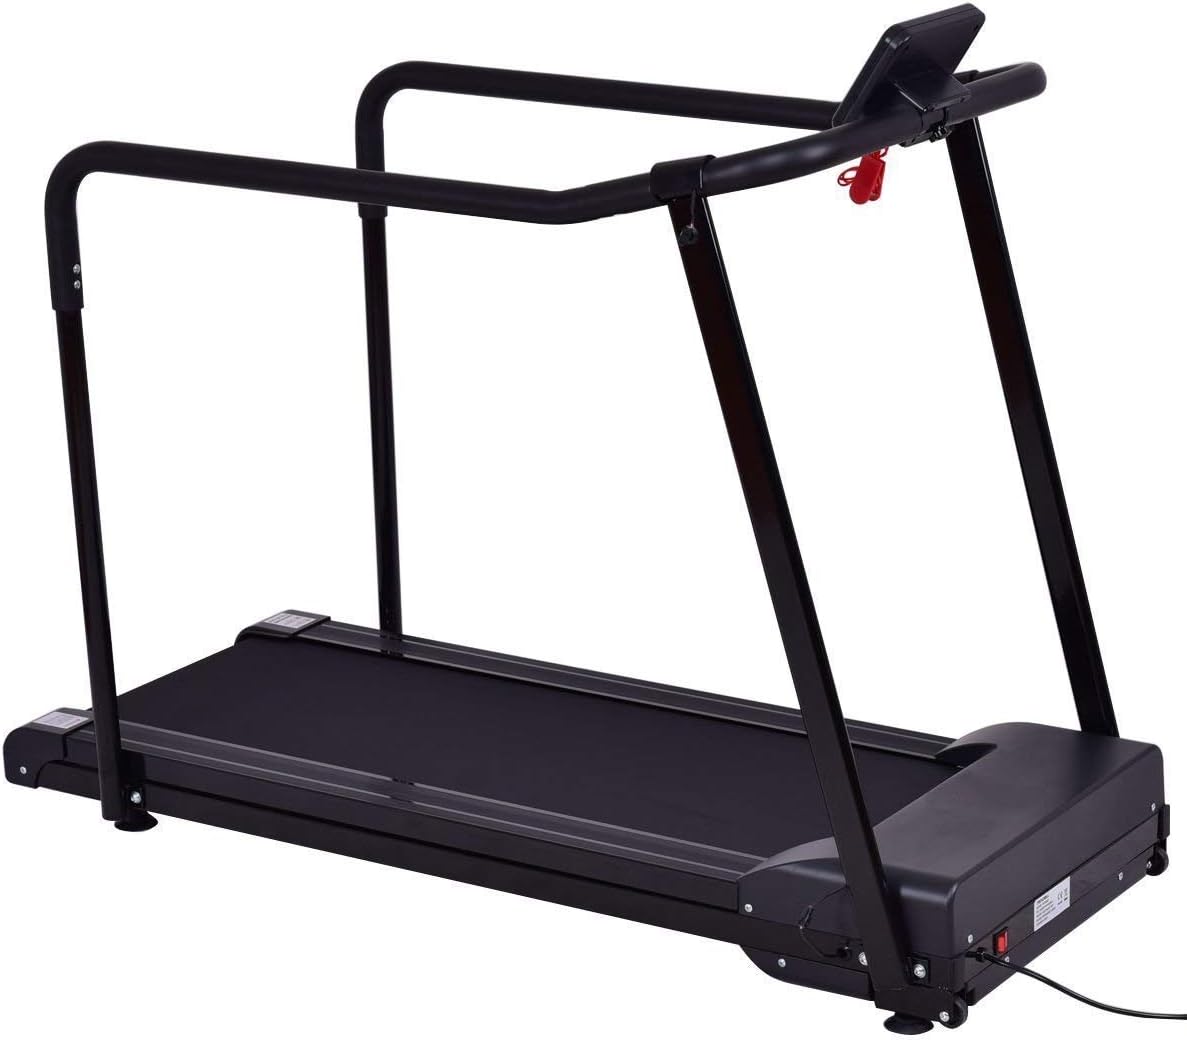 Gymax Treadmill Review